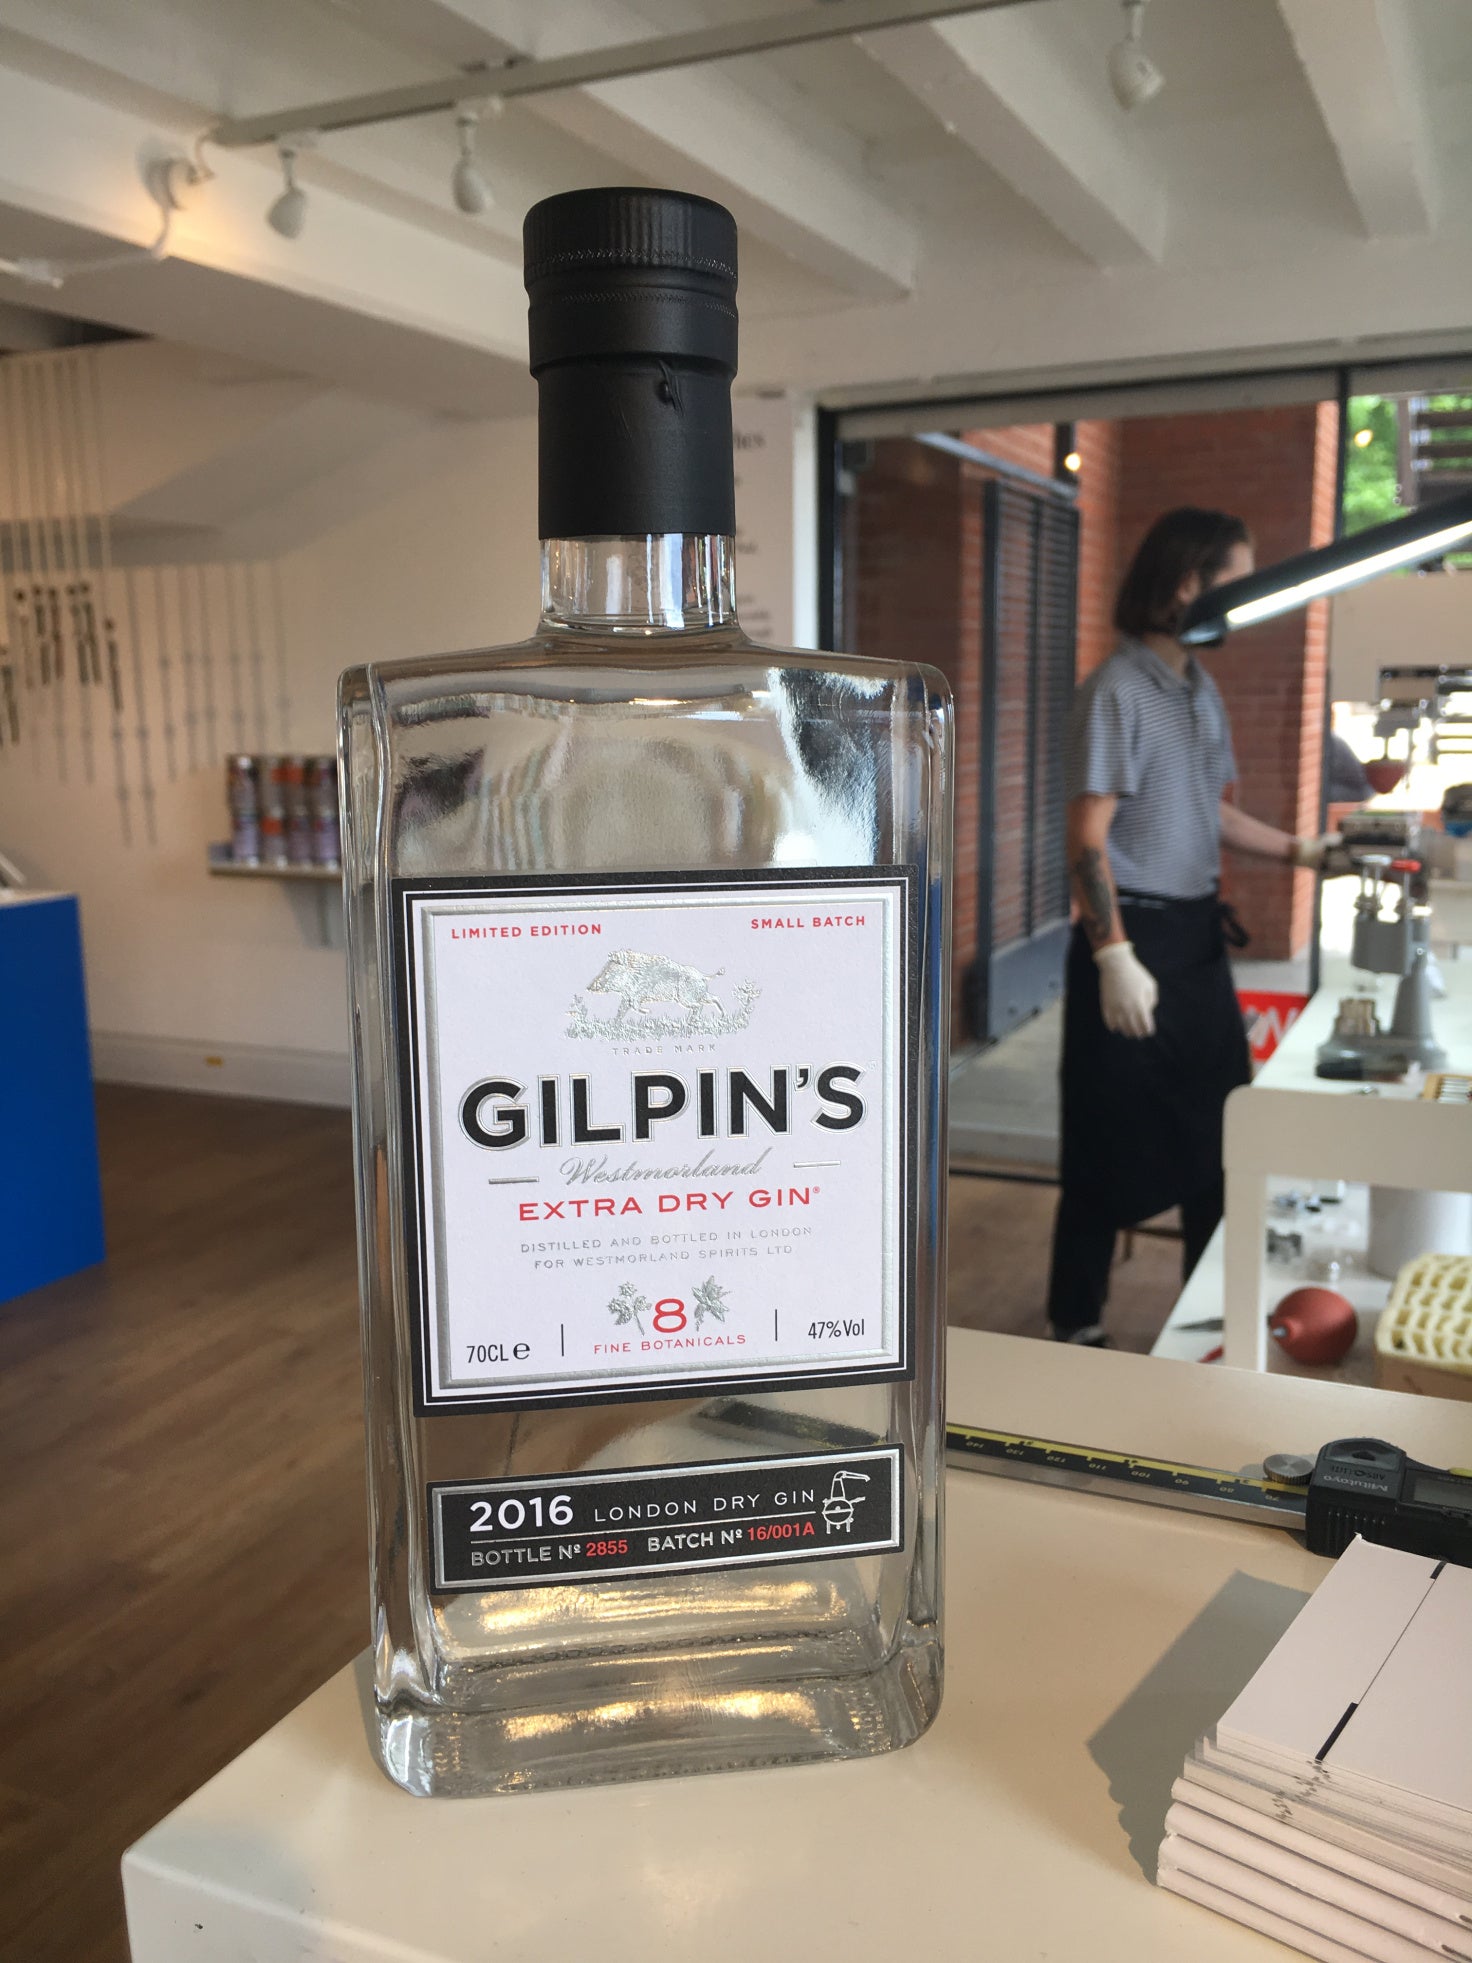 Gilpin's gin sponsored the event